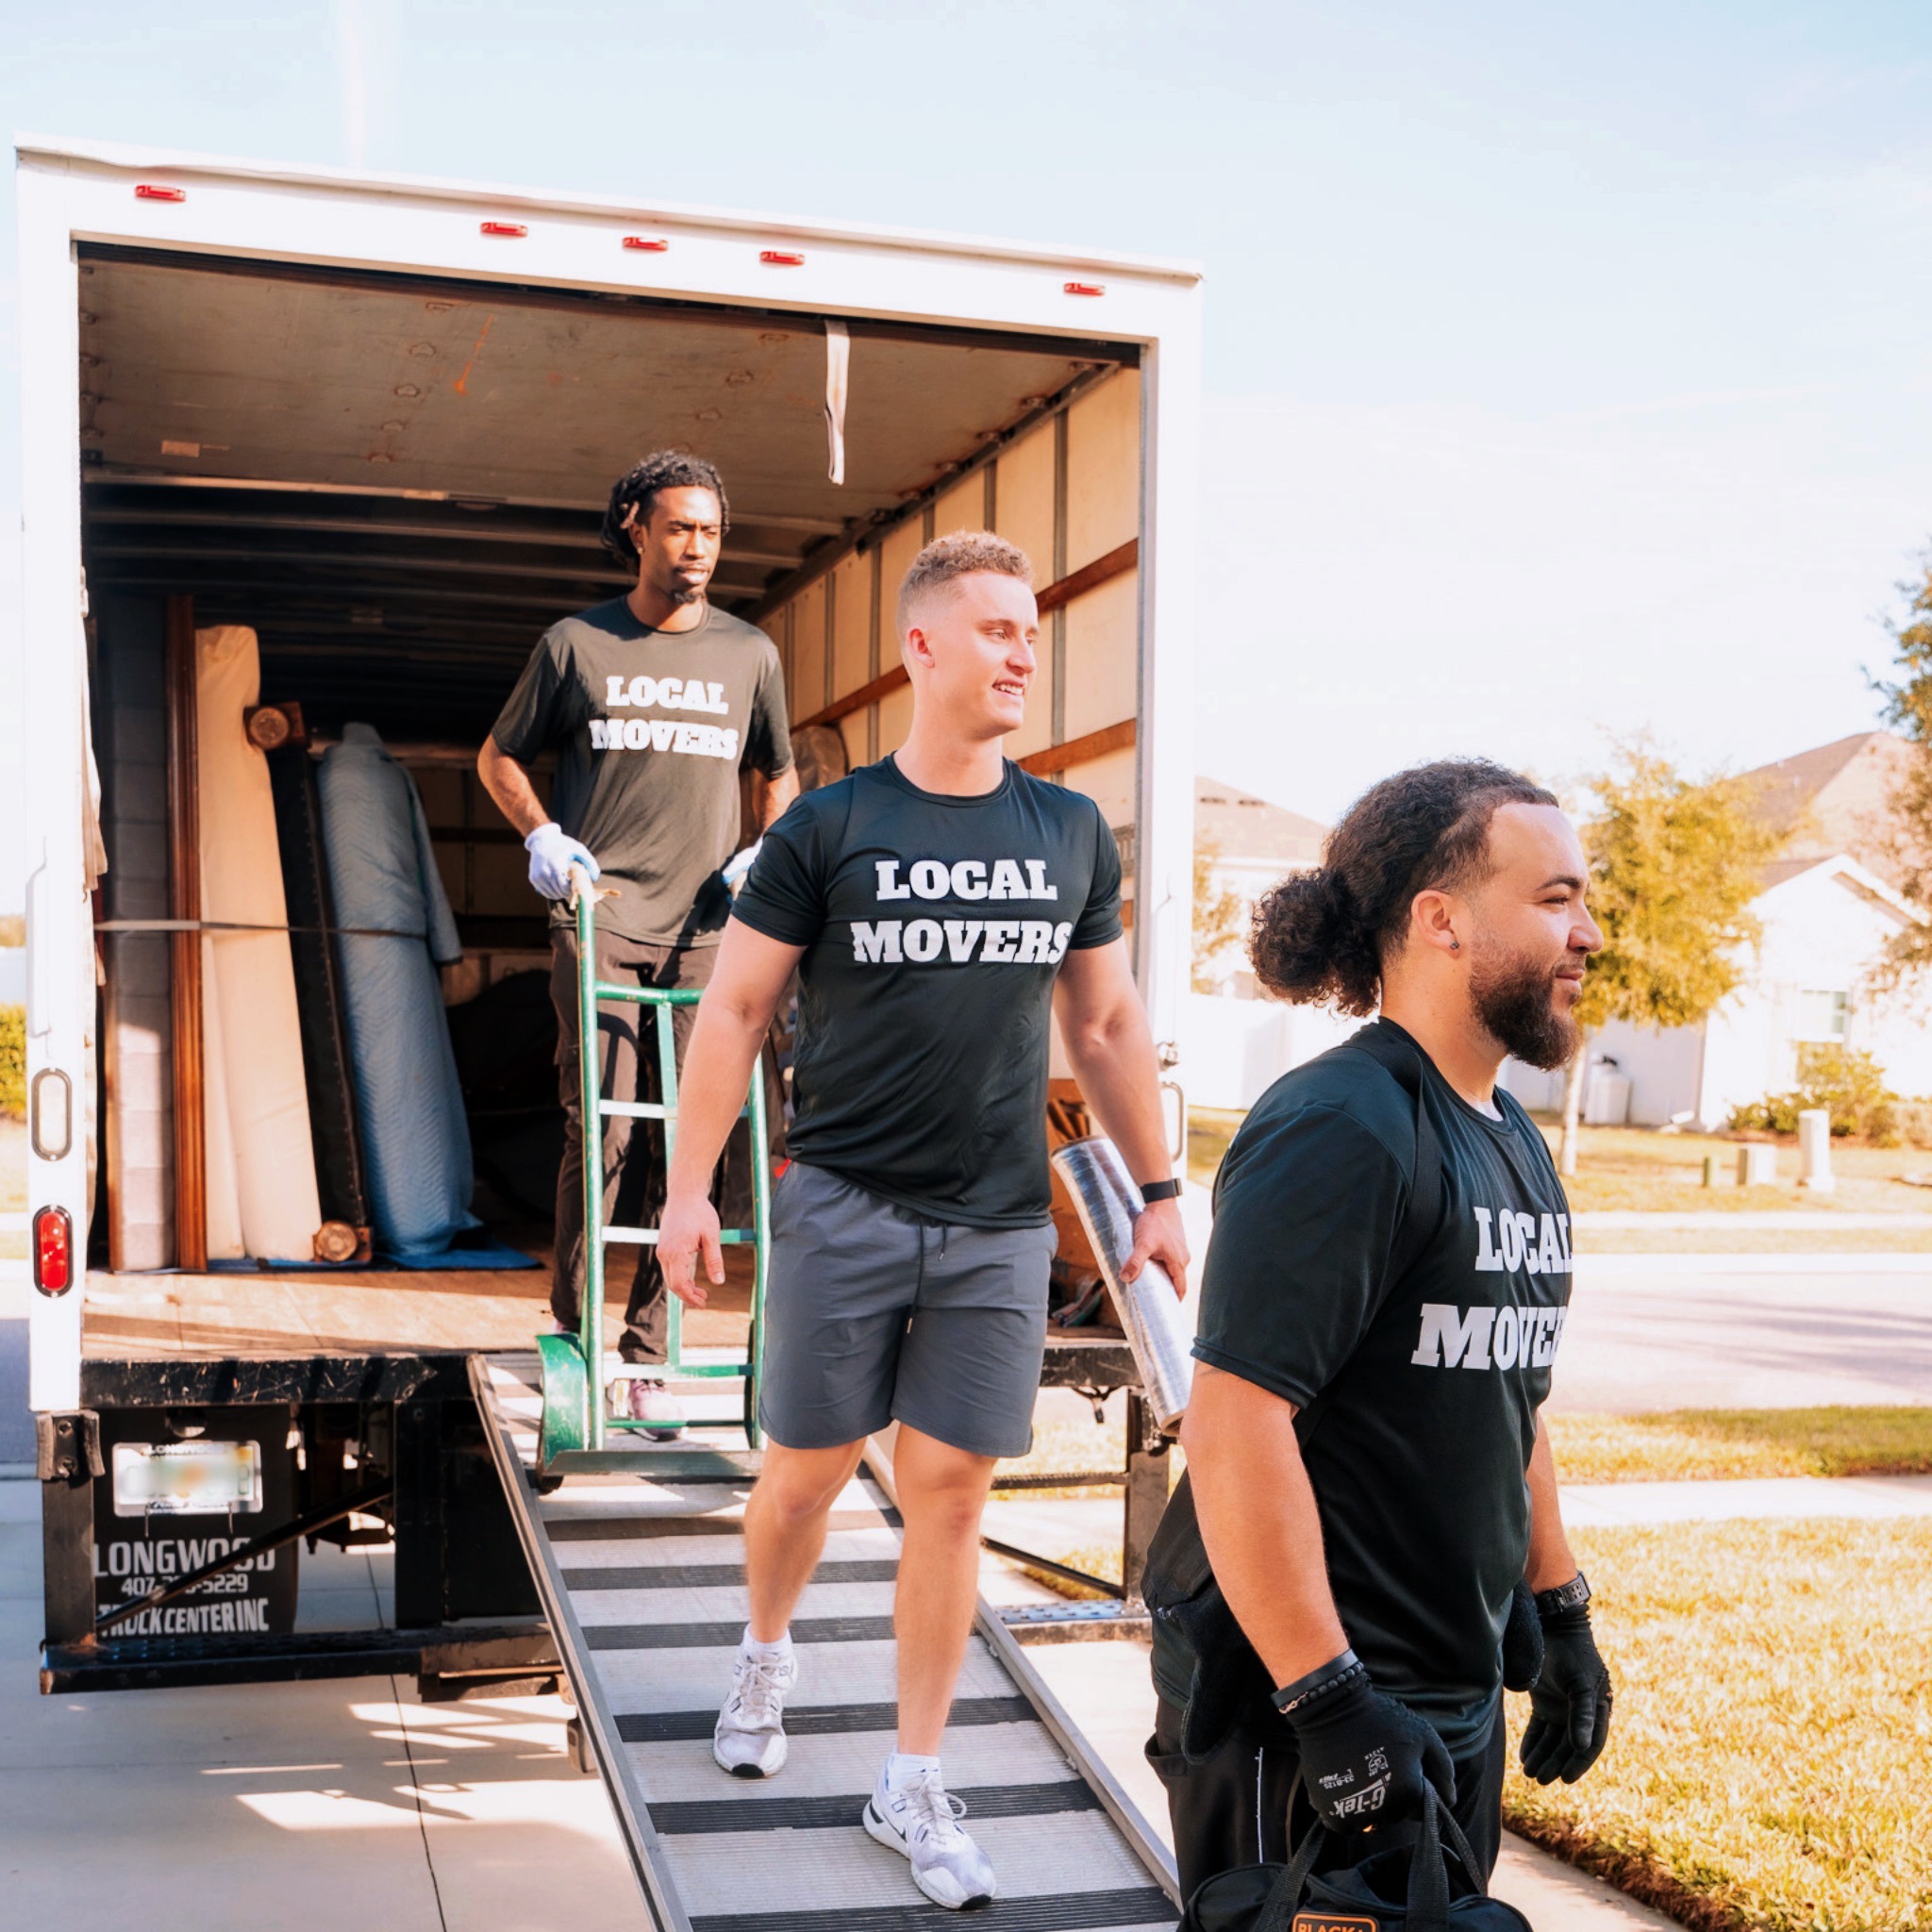 The Local Movers Best Movers in Orlando